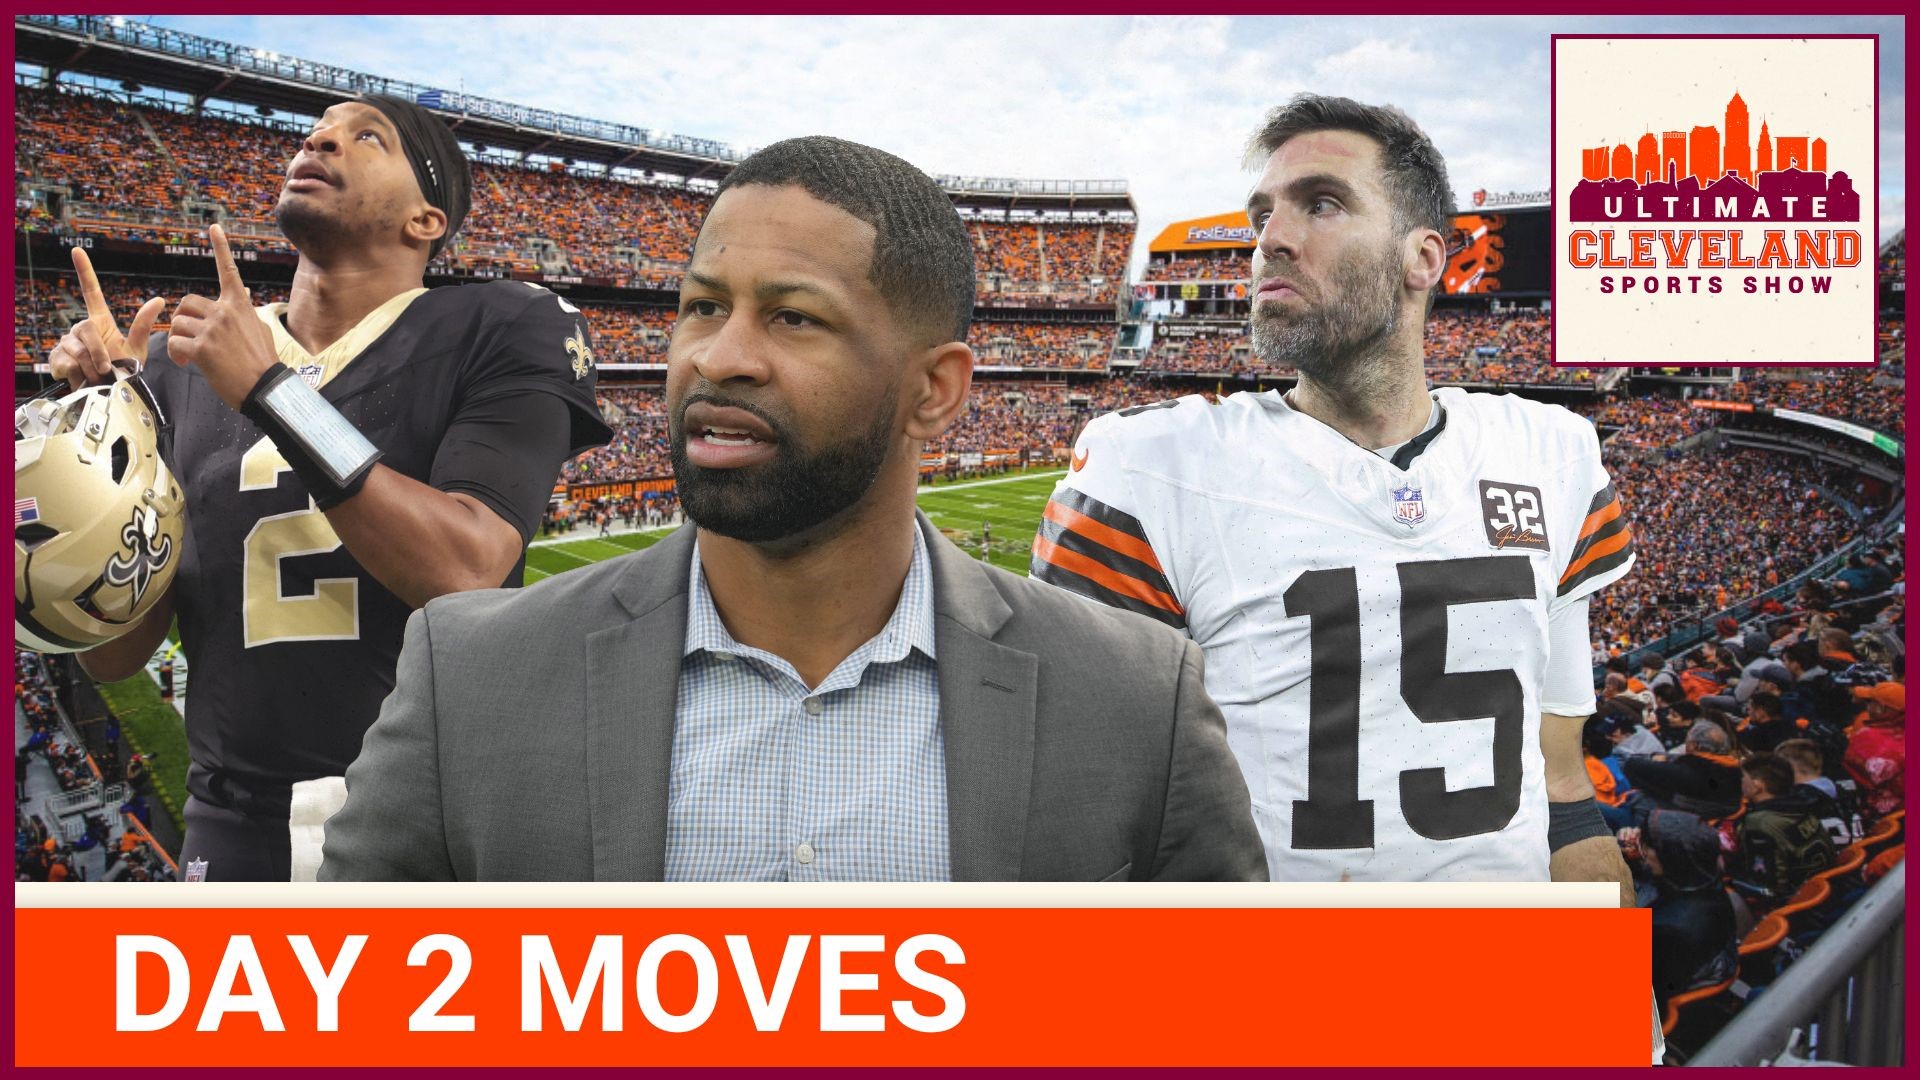 Cleveland Browns have moved on from backup QB Joe Flacco and signed Jameis Winston as the new QB2. Shelby Harris and Corey Bojorquez also resigned with the Cleveland